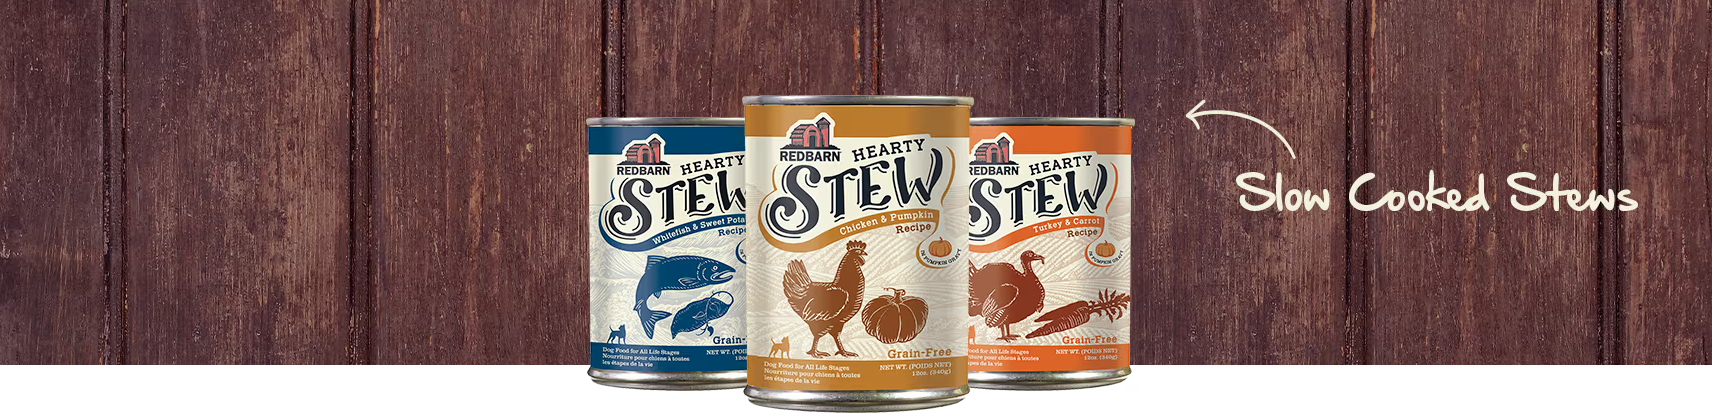 Photo of Cans of Redbarn Hearty Stews